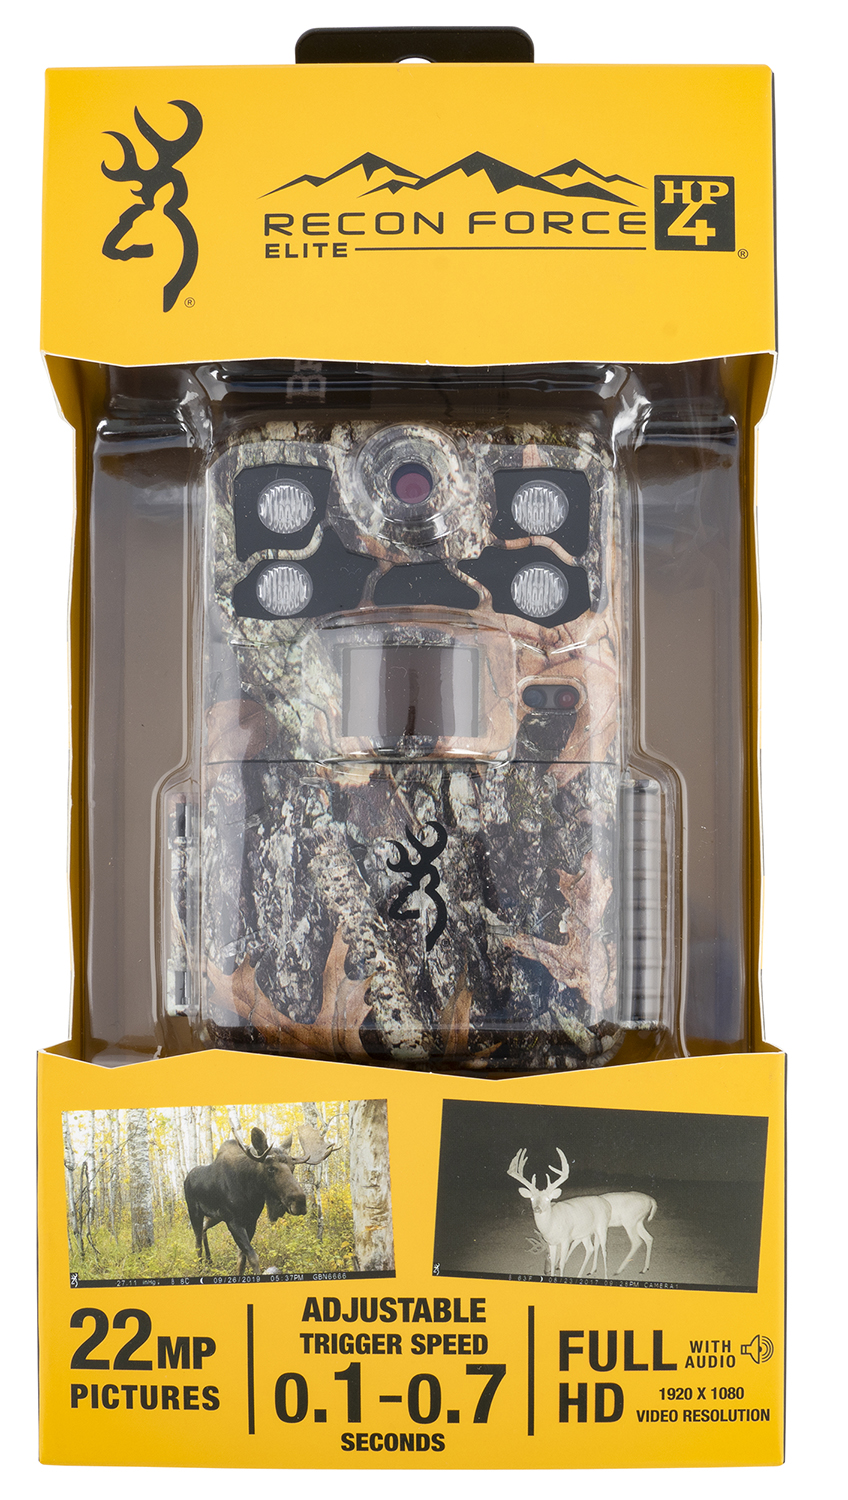 BROWNING TRAIL CAM RECON FORCE ELITE HP4 1920X1080 HD 22MP